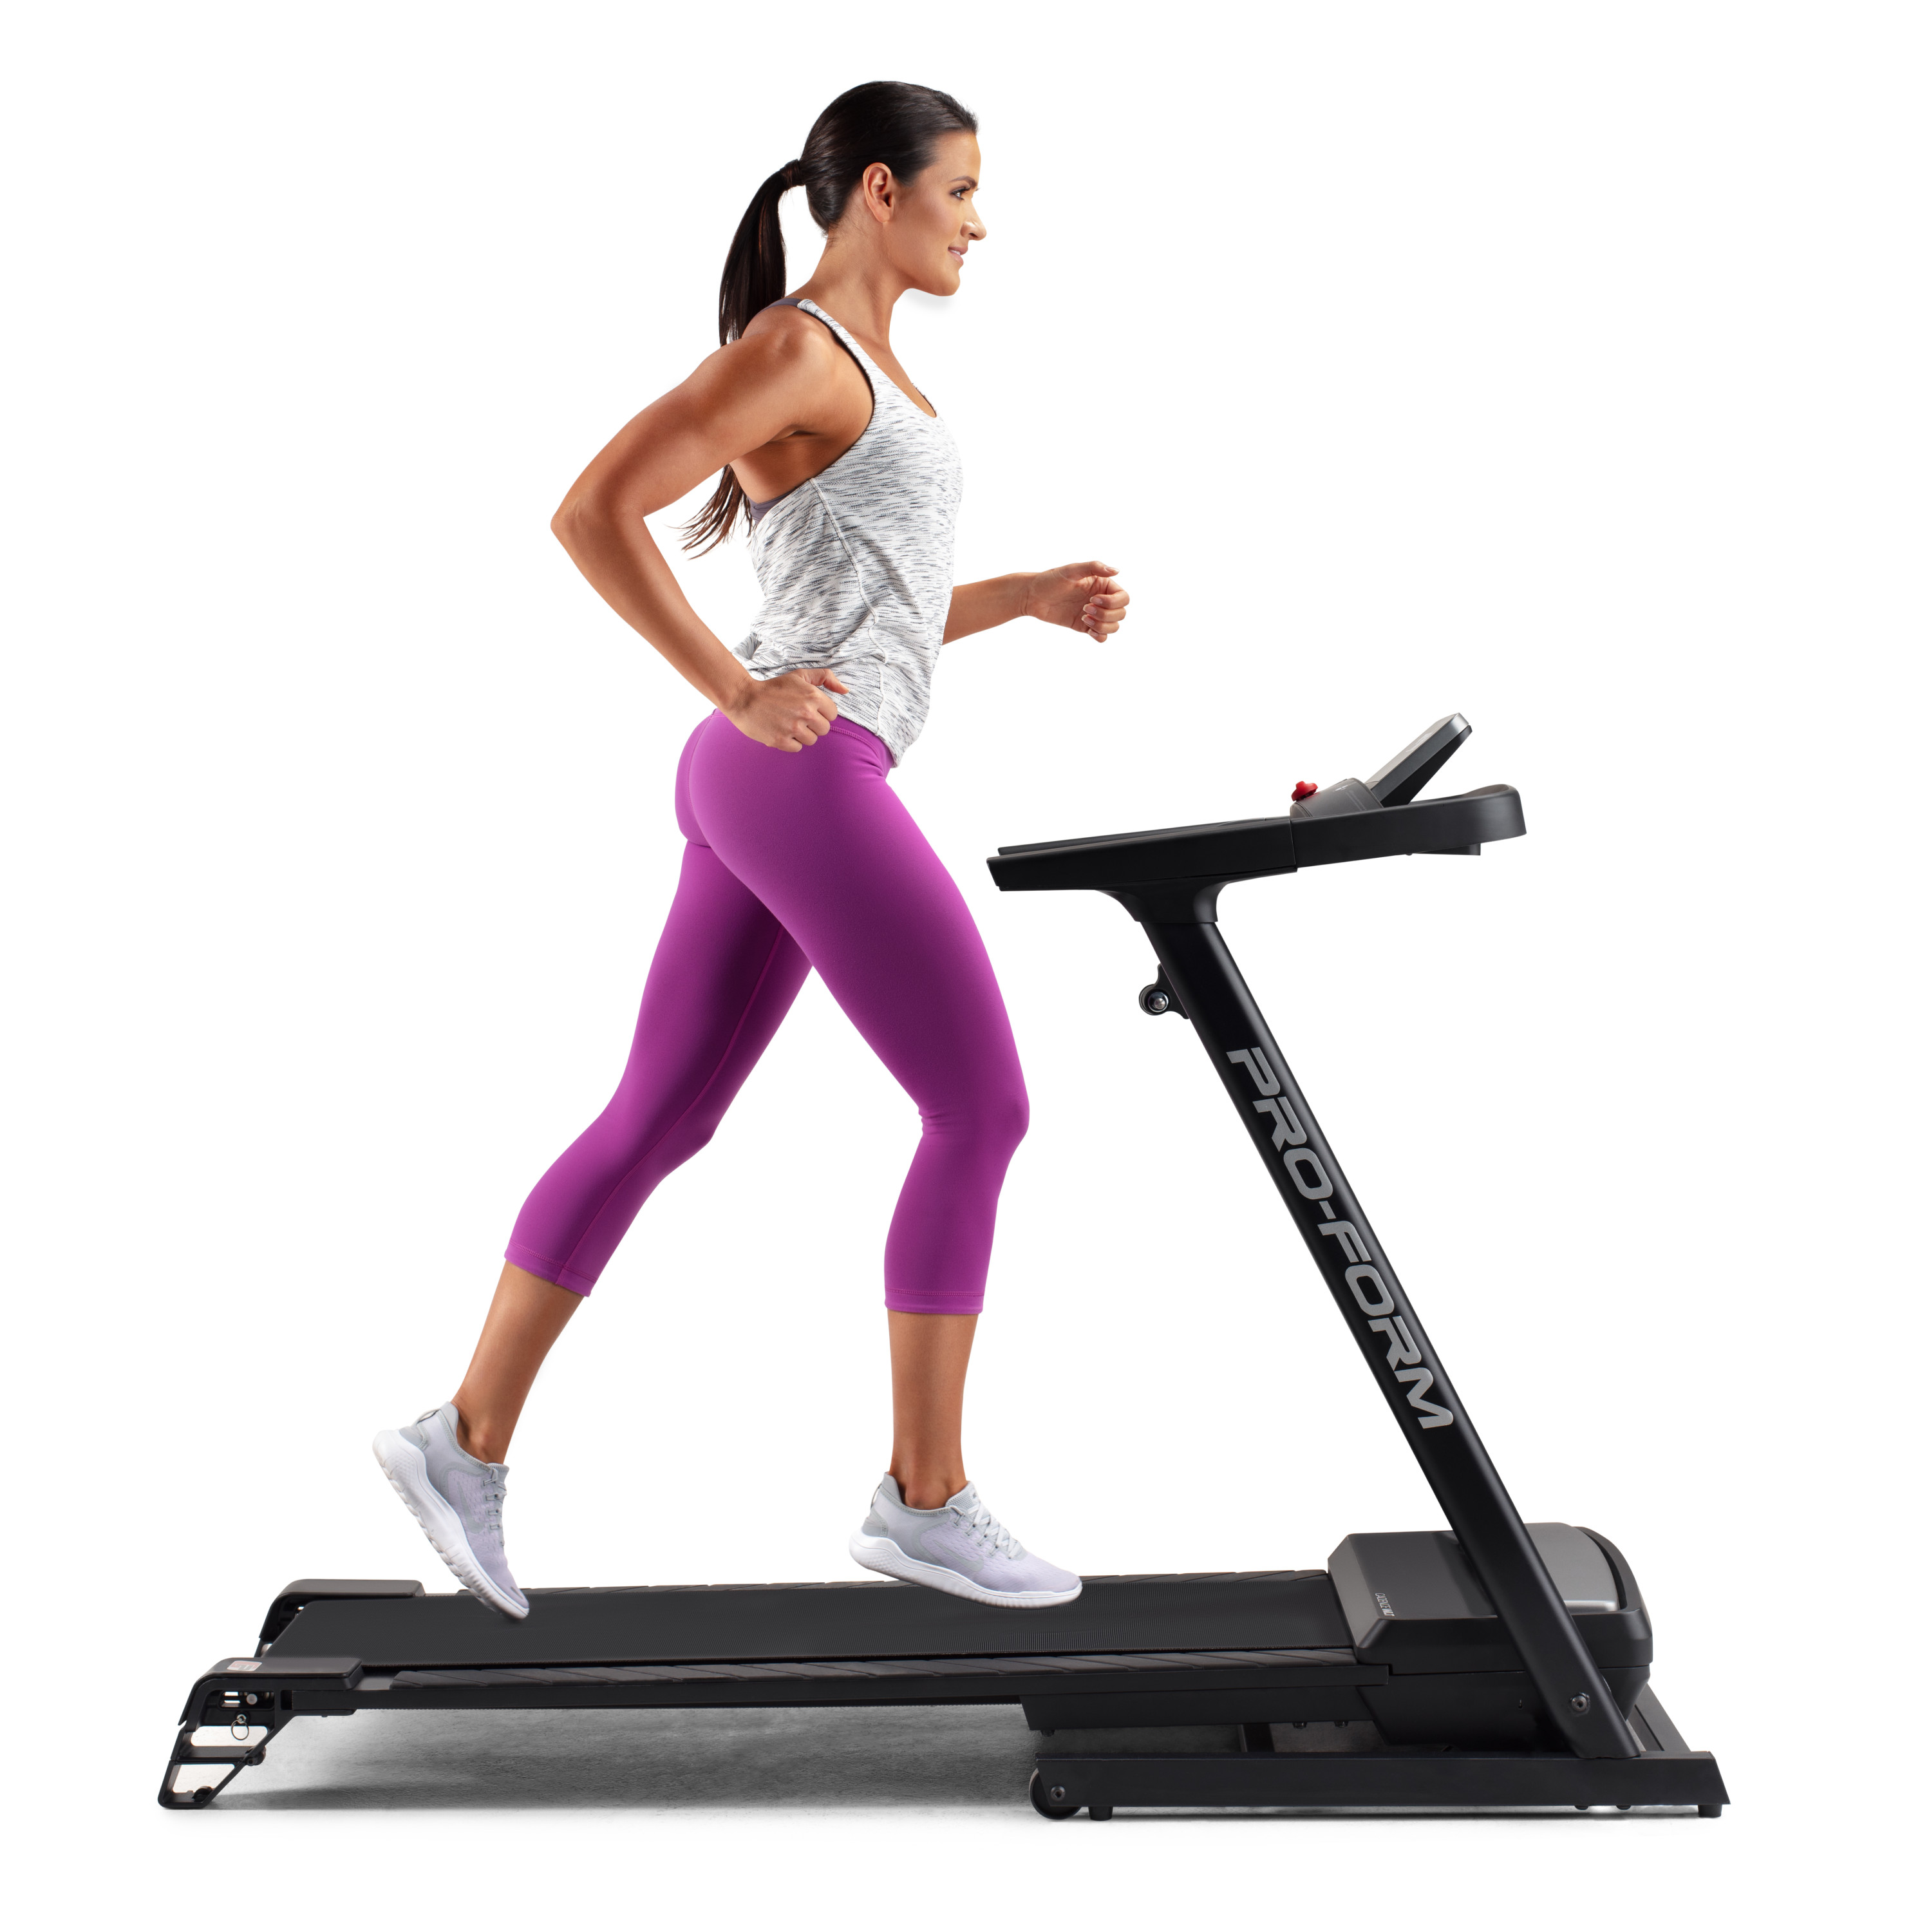 ProForm Cadence WLT Folding Treadmill with Reflex Deck for Walking and Jogging, iFit Bluetooth Enabled - image 27 of 31